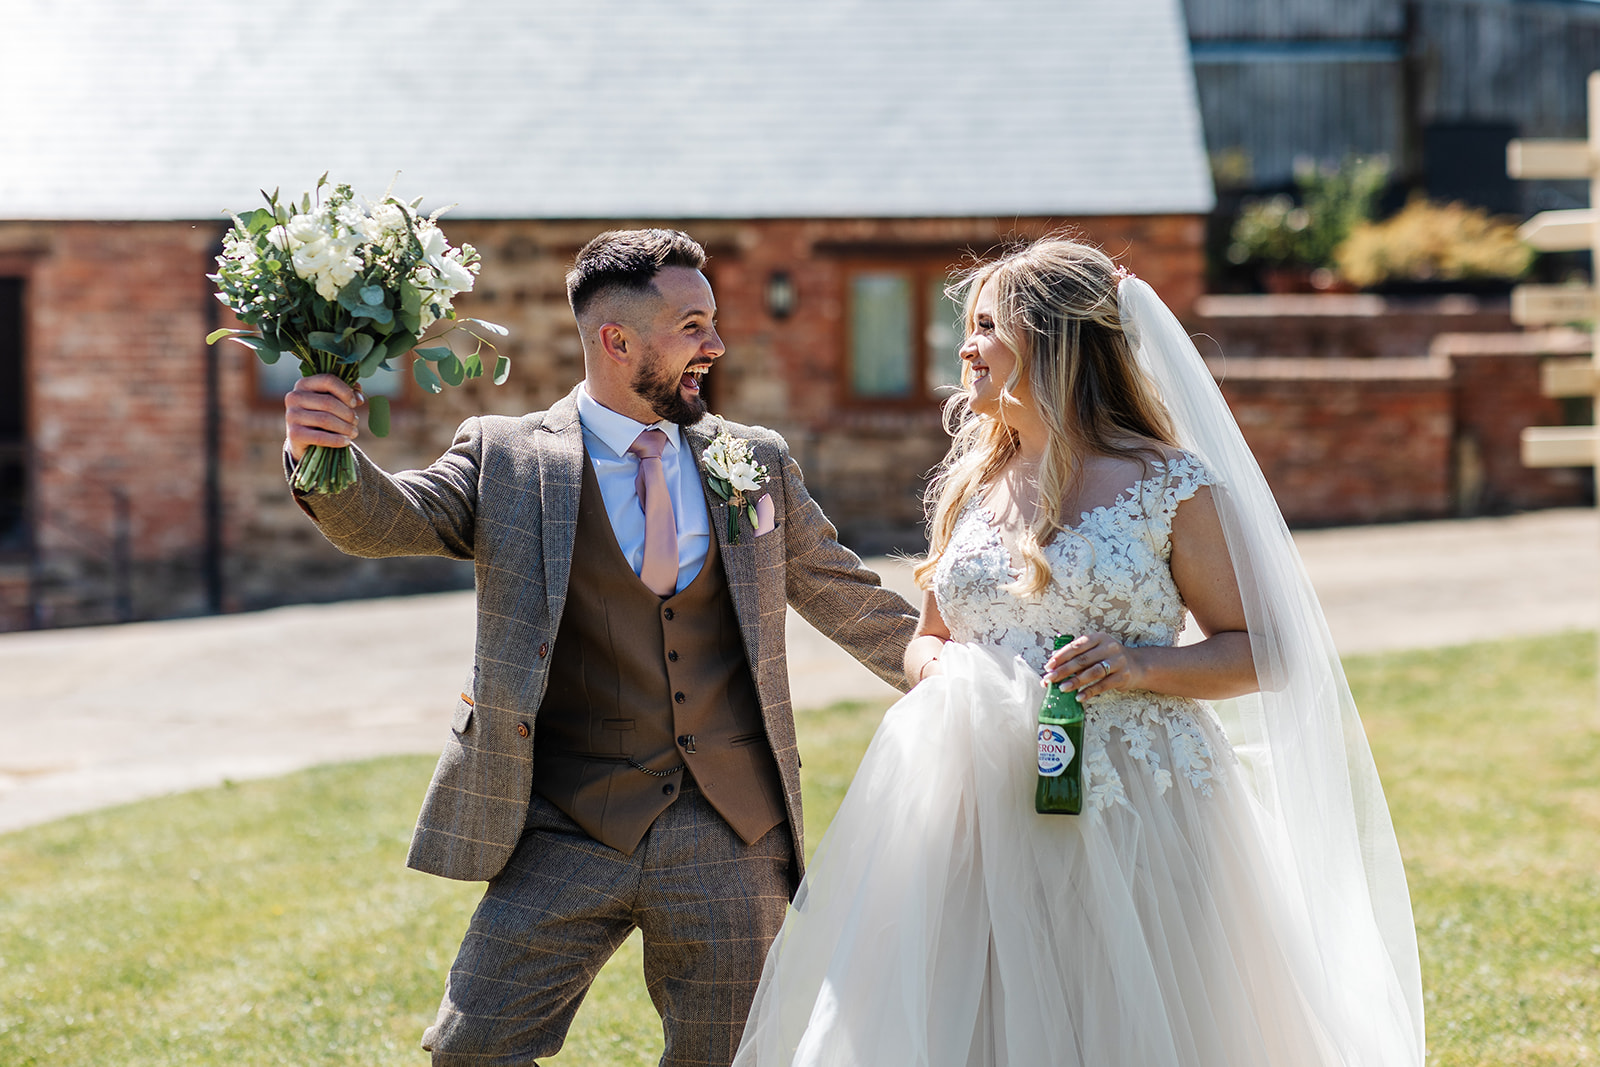 Couple walking, bride has a bottle of beer in her hand with the groom holding up her bouquet 